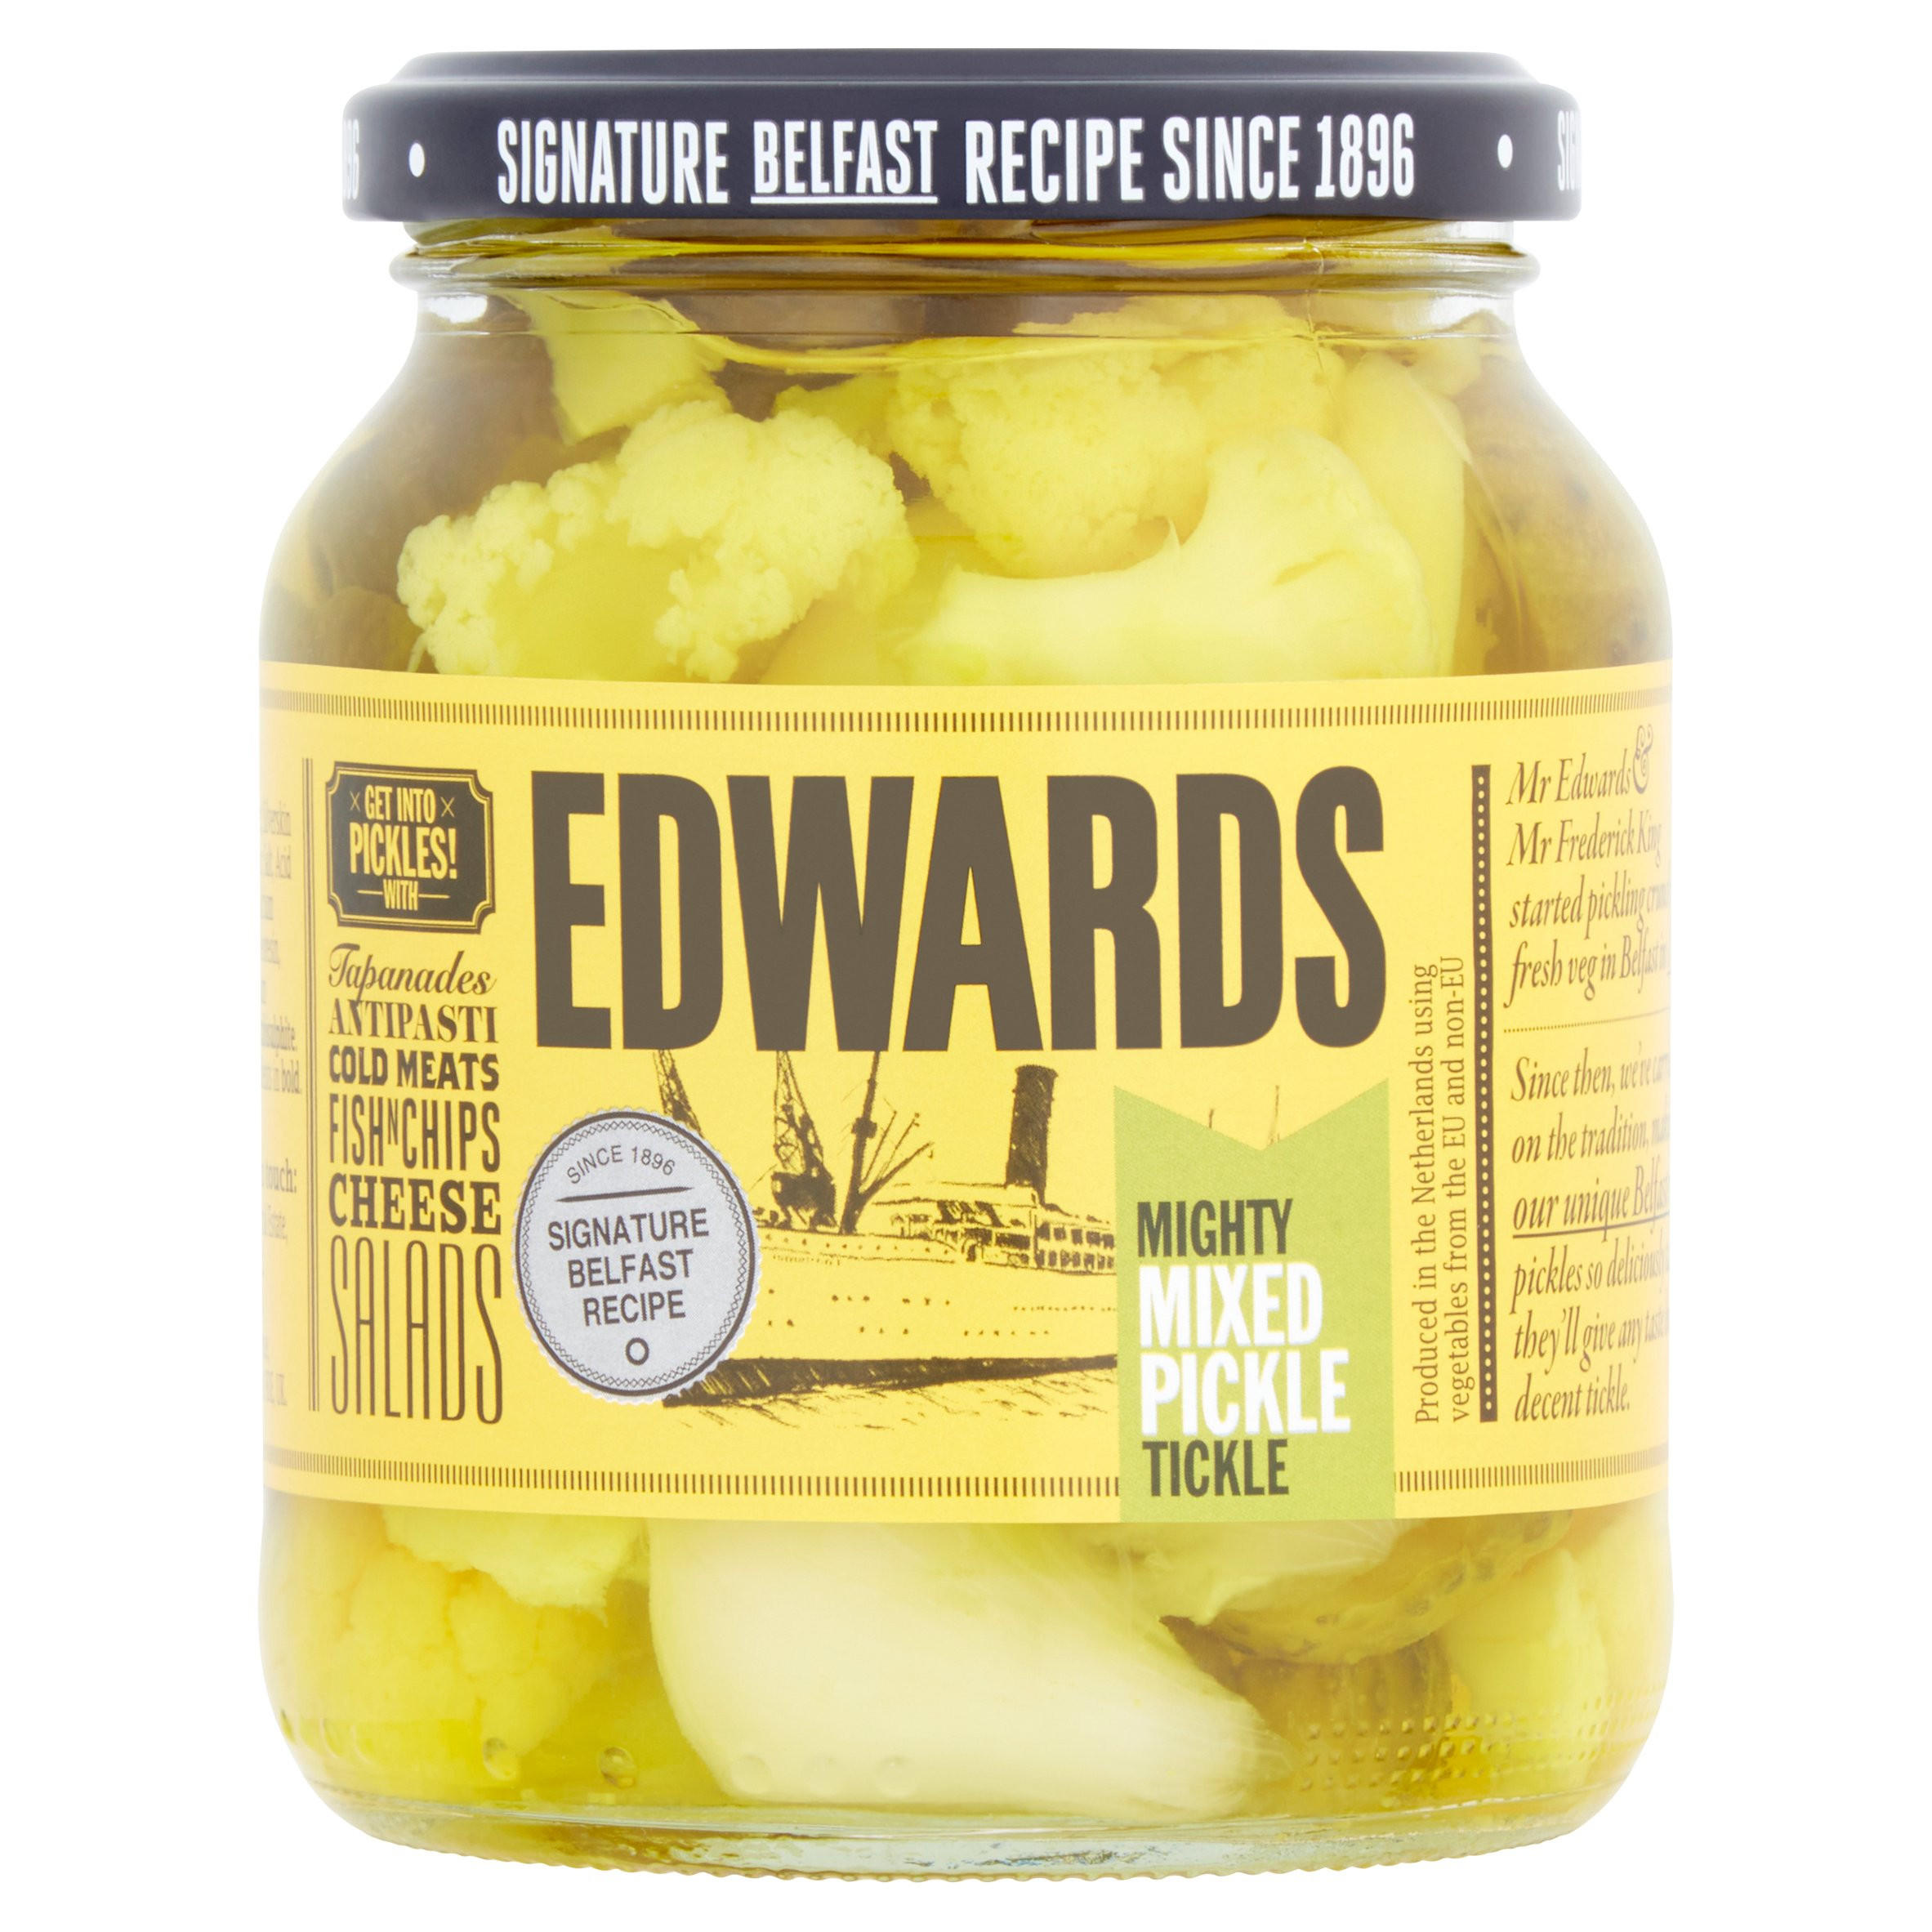 Edwards Mighty Mixed Pickle Tickle 350g Pickles And Chutneys Iceland